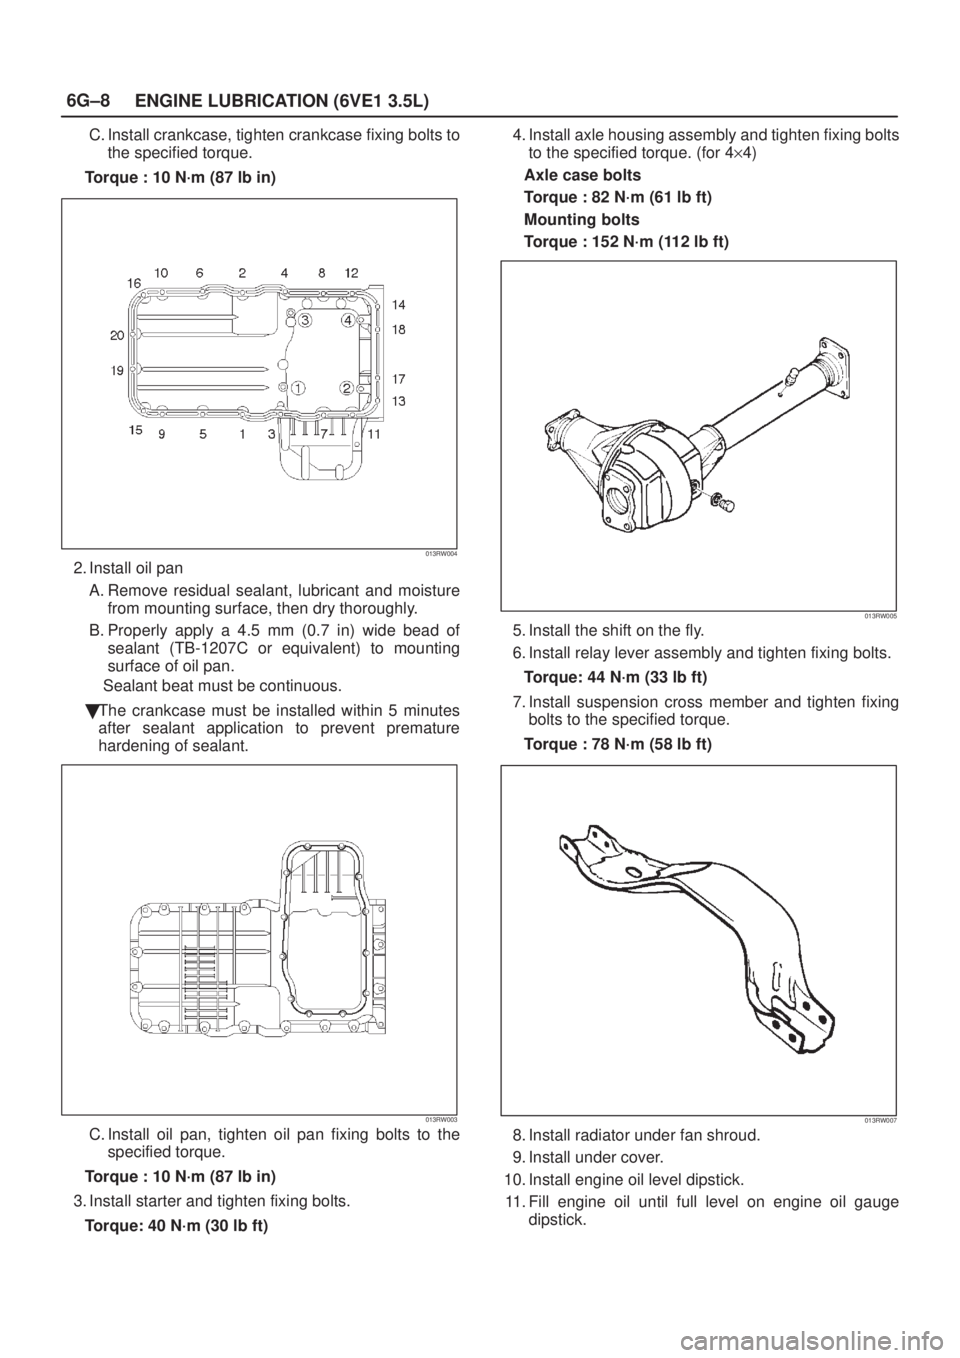 ISUZU AXIOM 2002  Service Repair Manual 6G±8
ENGINE LUBRICATION (6VE1 3.5L)
C. Install crankcase, tighten crankcase fixing bolts to
the specified torque.
Torque : 10 N´m (87 lb in)
013RW004
2. Install oil pan
A. Remove residual sealant, l